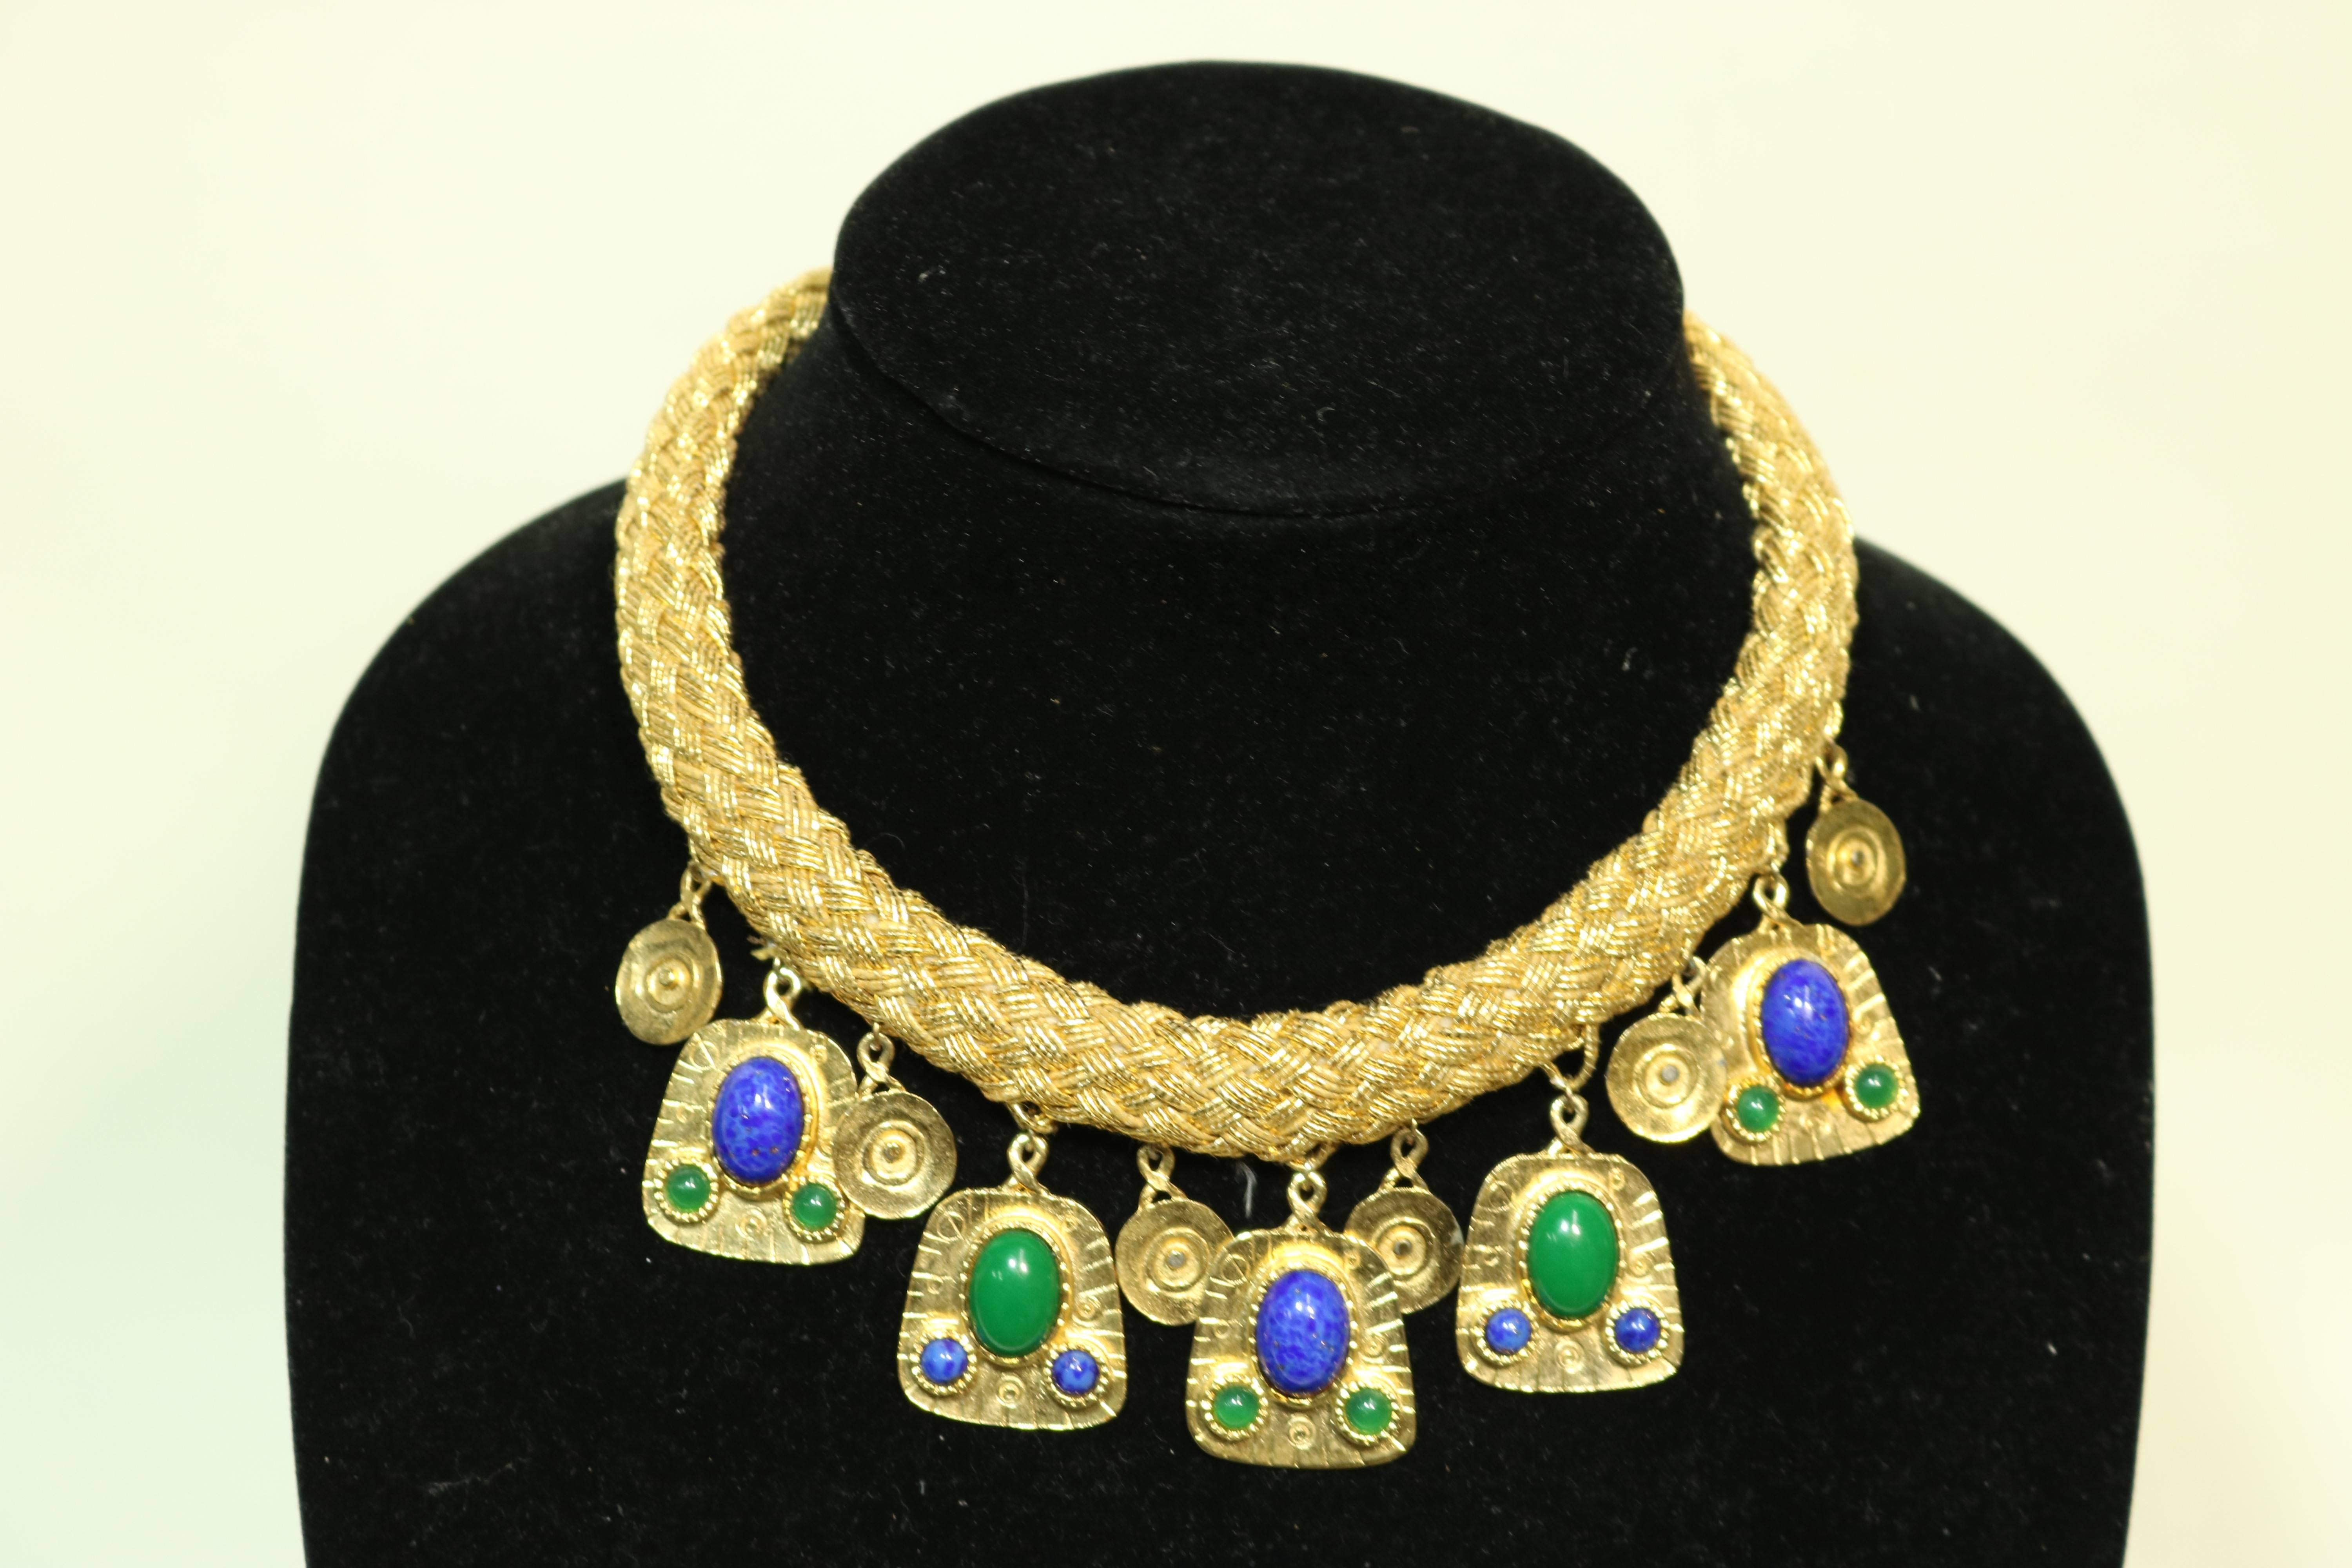 Stunning Egyptian style woven gold thread collar necklace with heavy gold plate articulated drops laden with alternating malachite and lapis cabochons
and circular drops.
An exotic look makes for a striking vision when worn.